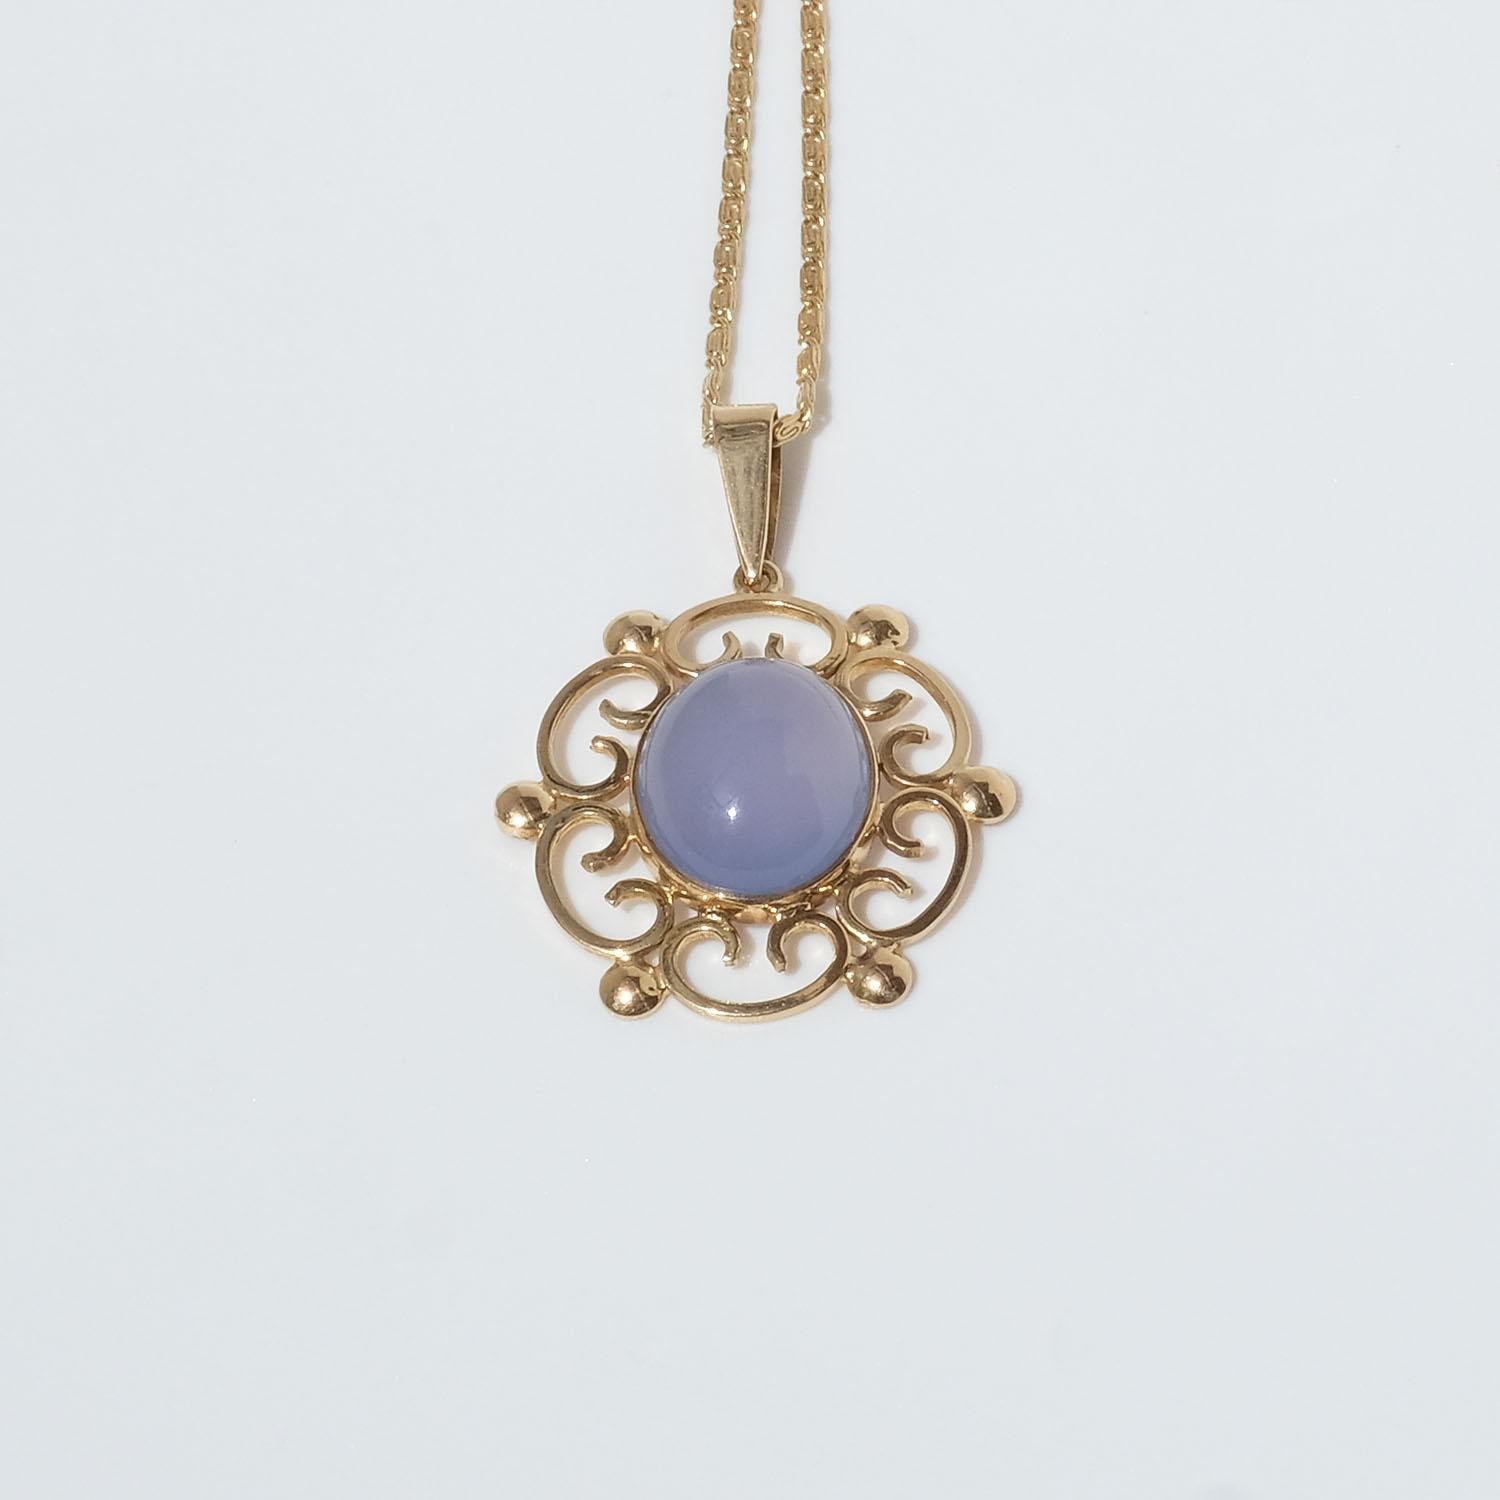 This 18 karat gold pendant features a smooth, oval moonstone with a cabochon cut. The moonstone exhibits a soft, translucent blue hue with a subtle glow that appears to shift and change when it catches the light. Surrounding the moonstone is an